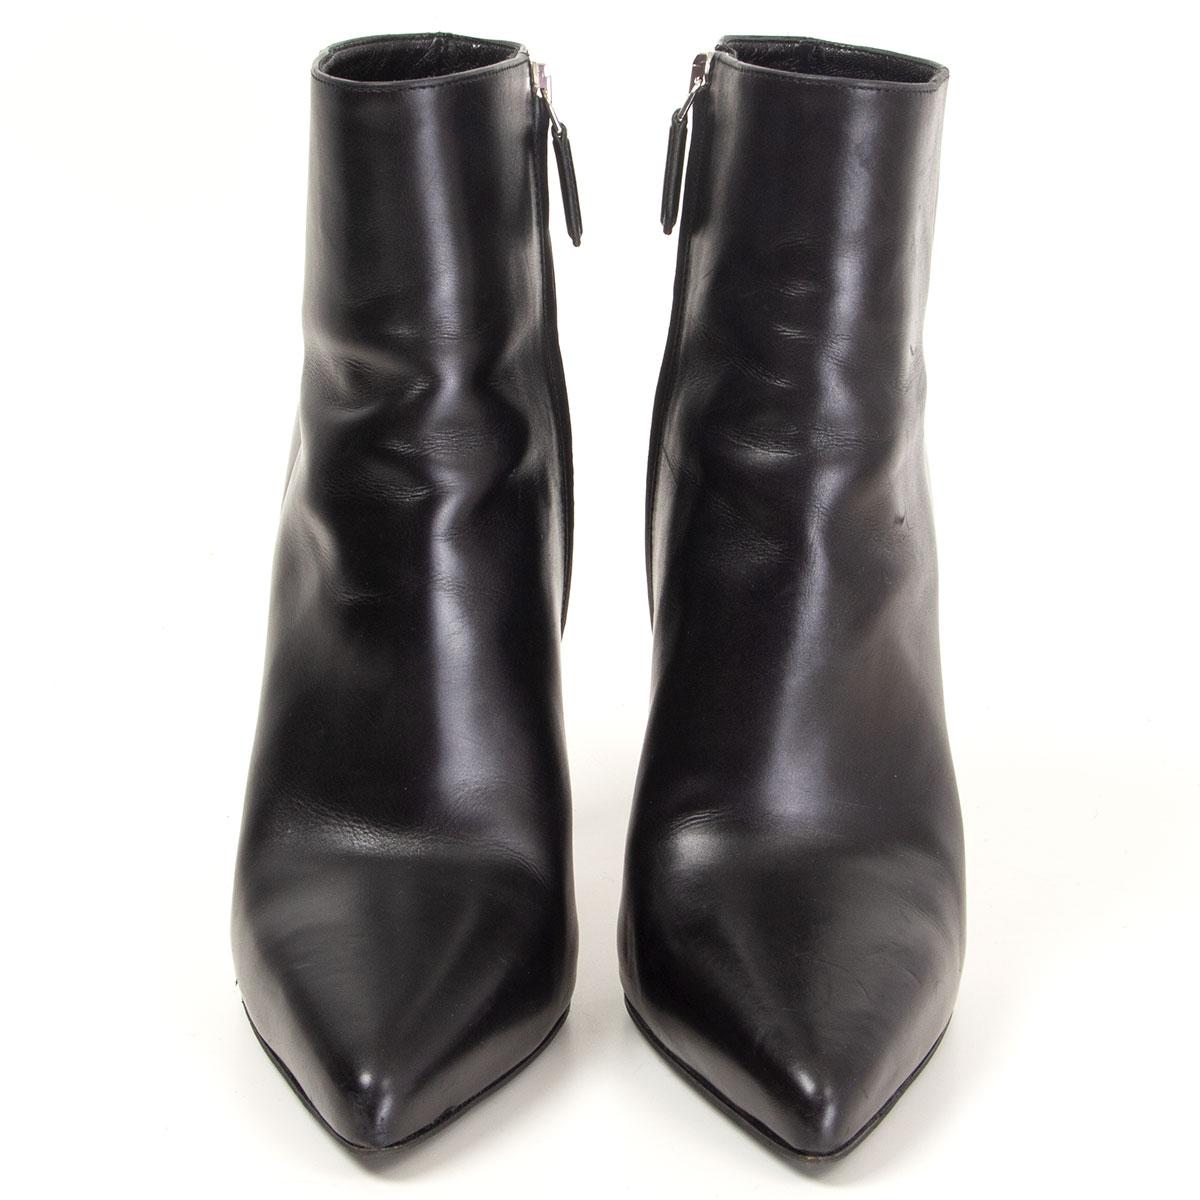 100% authentic Prada pointed-toe high-heel ankle-boots in black calfskin. Open with a zipper on the inside. Have been worn and are in excellent condition.

Measurements
Imprinted Size	37.5
Shoe Size	37.5
Inside Sole	25cm (9.8in)
Width	7.5cm